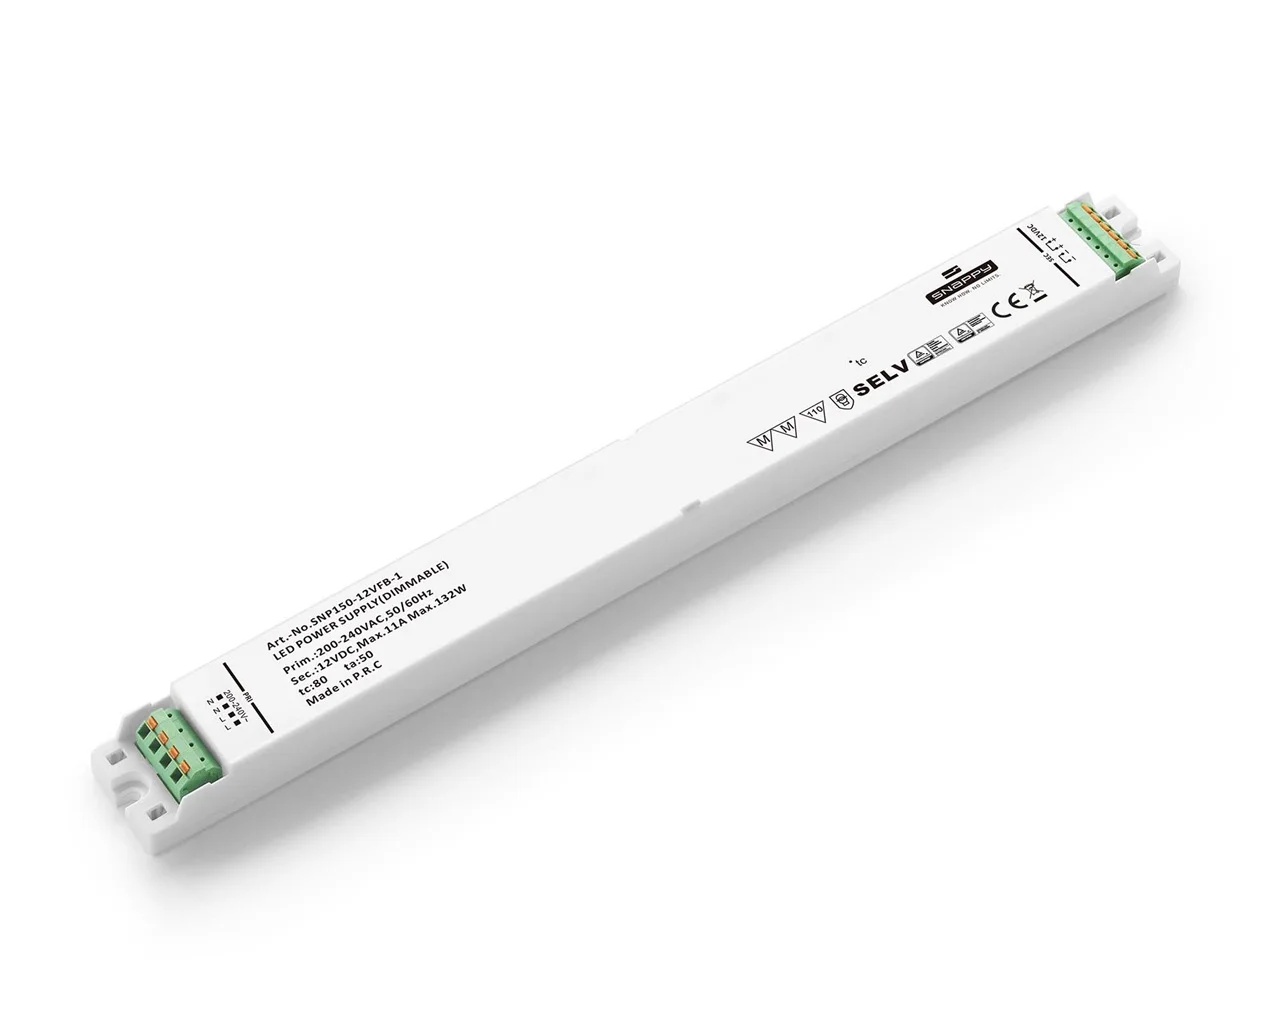 SNP150-VFB-1 input 200-240V 12V/24V 150W IP20 constant voltage push in clamp terminal SNAPPY linear  LED Driver